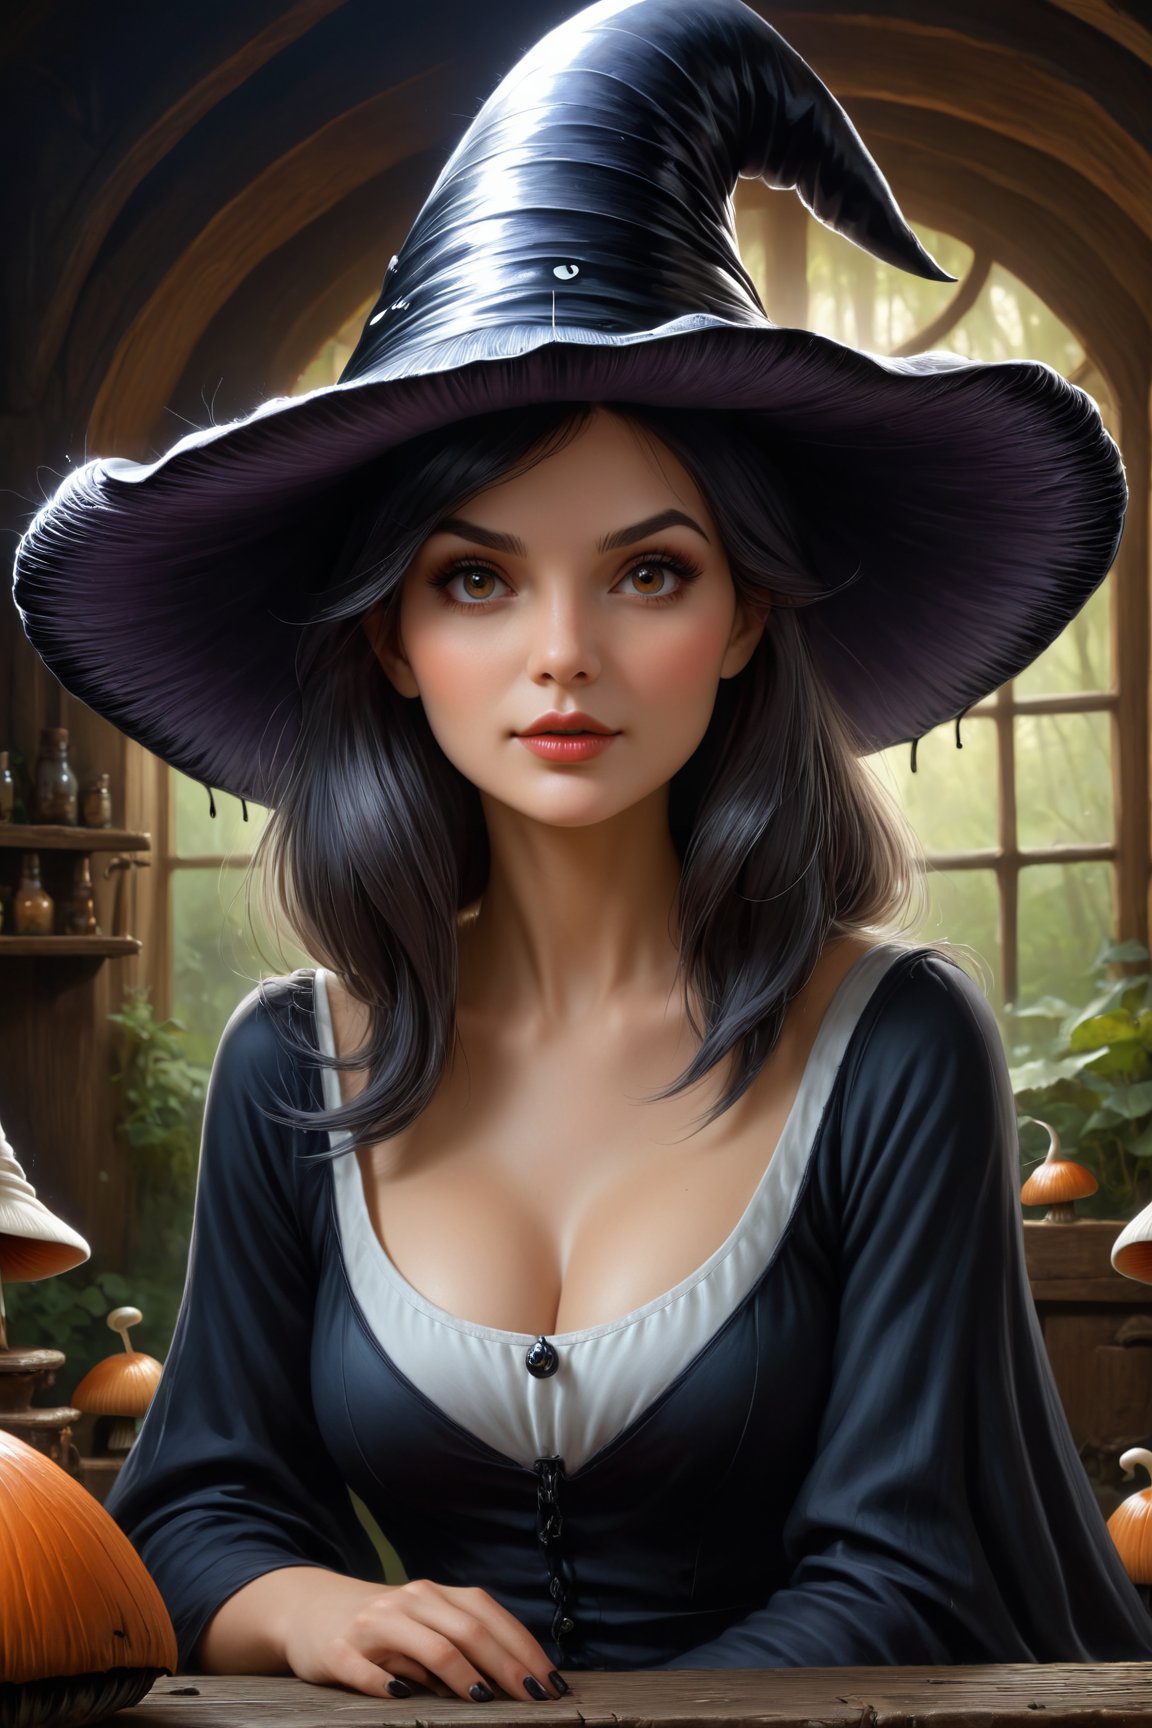 A woman, mishievious expression, masterpiece, best quality, sharp focus, digital illustration, hyperrealistic painting, chiaroscuro, a1sw-InkyCapWitch, sm1cdrip-witchhat